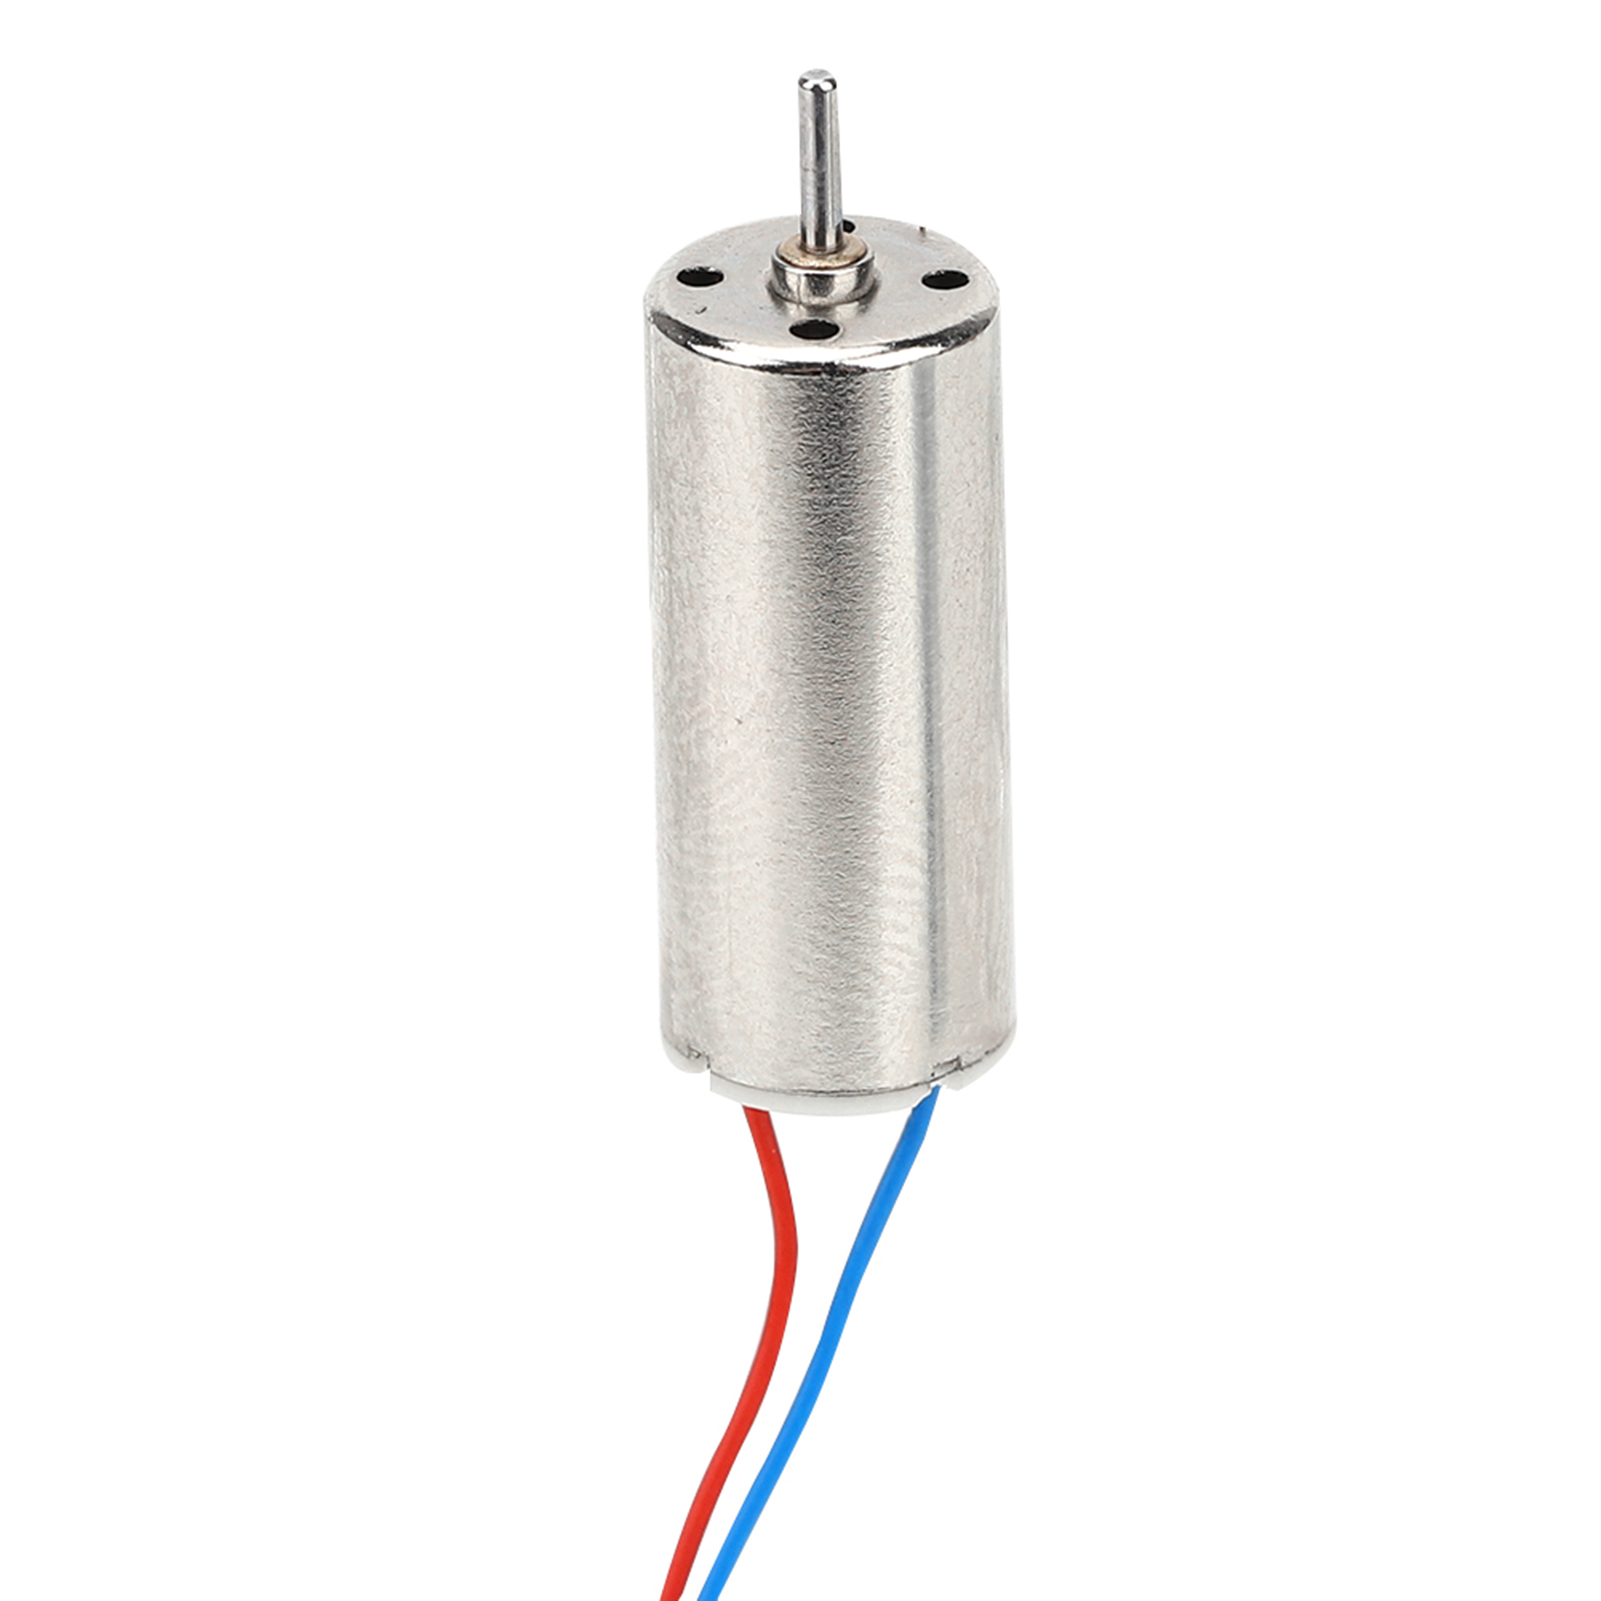 8.5mm Drone Motor for 12cm Tail Circuit